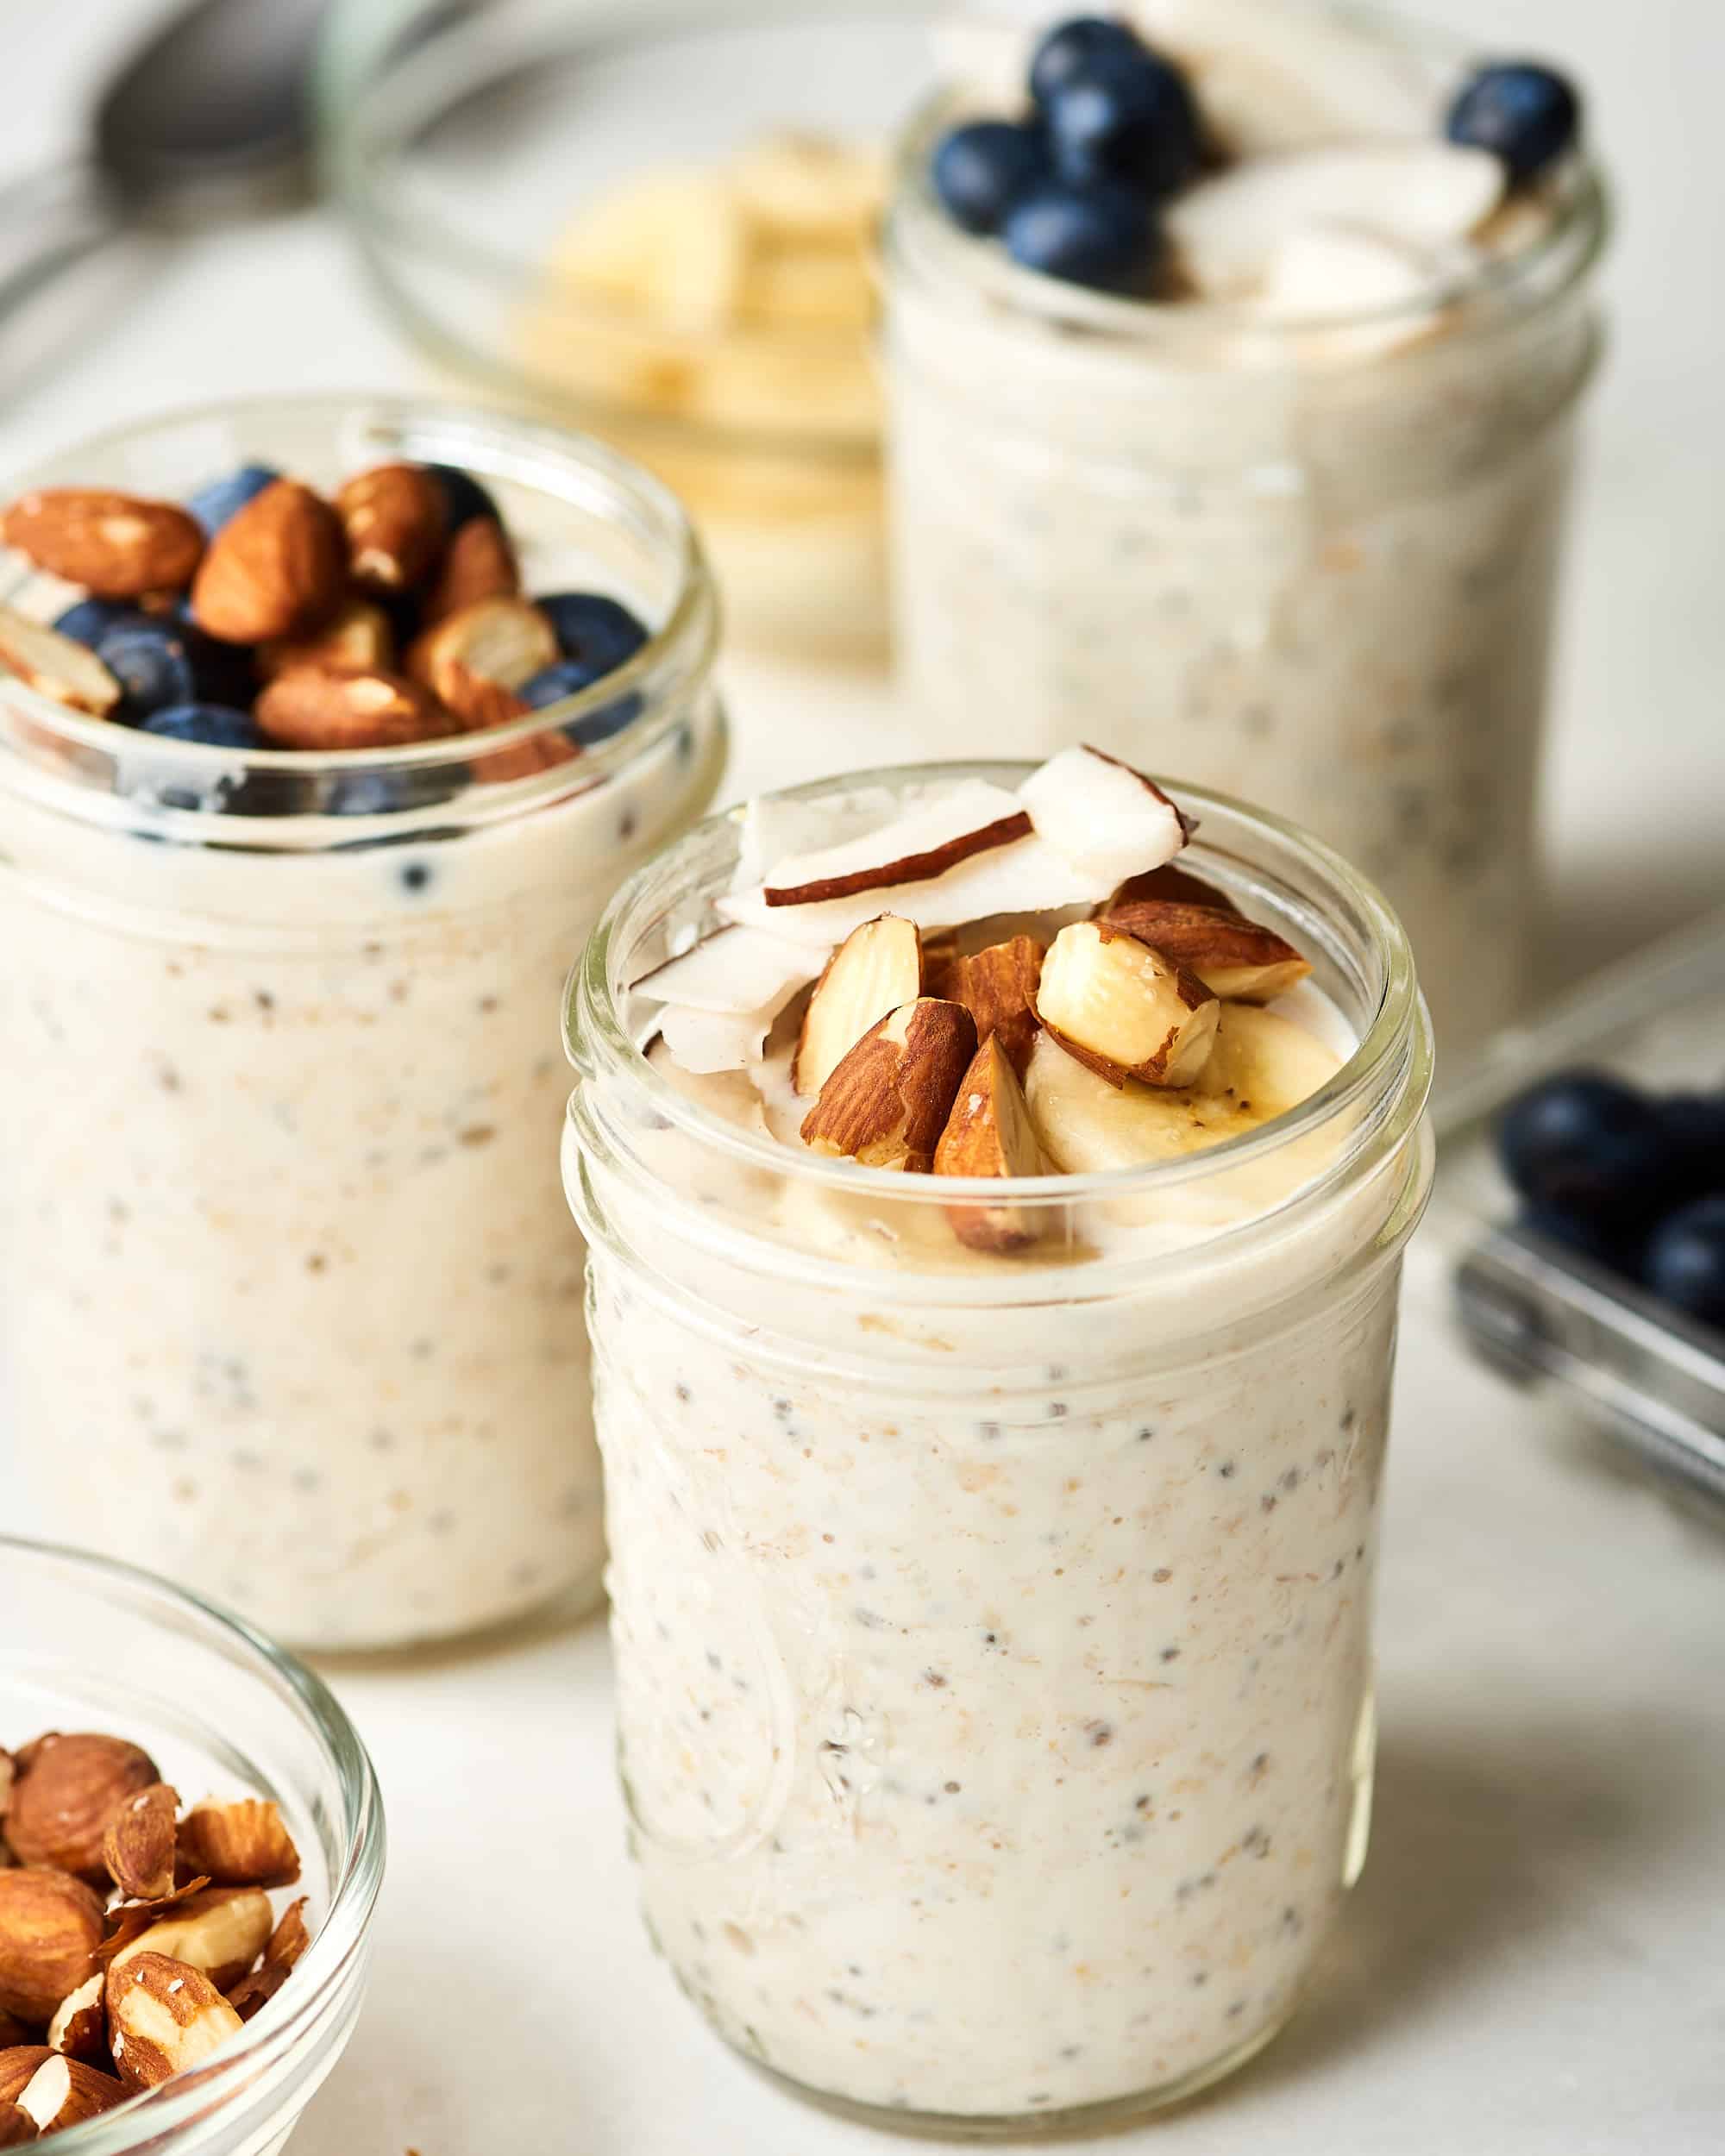 How to Make the Best Overnight Oats